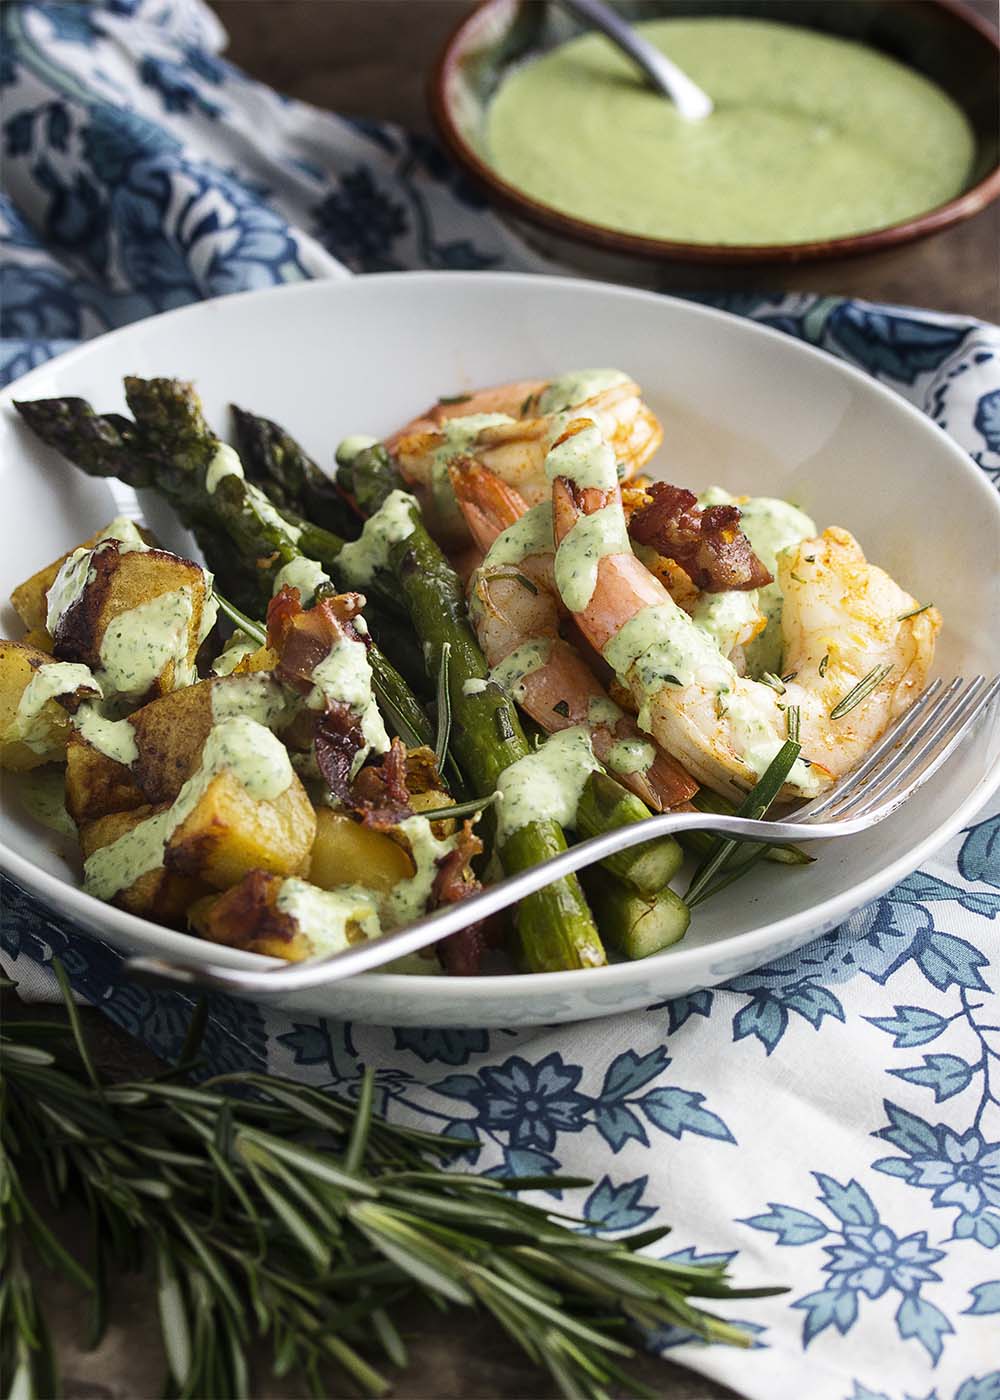 Healthy and easy! This roasted shrimp, asparagus, and potato sheet pan dinner will have food on the table in no time, but without a pile of pots to wash. | justalittlebitofbacon.com